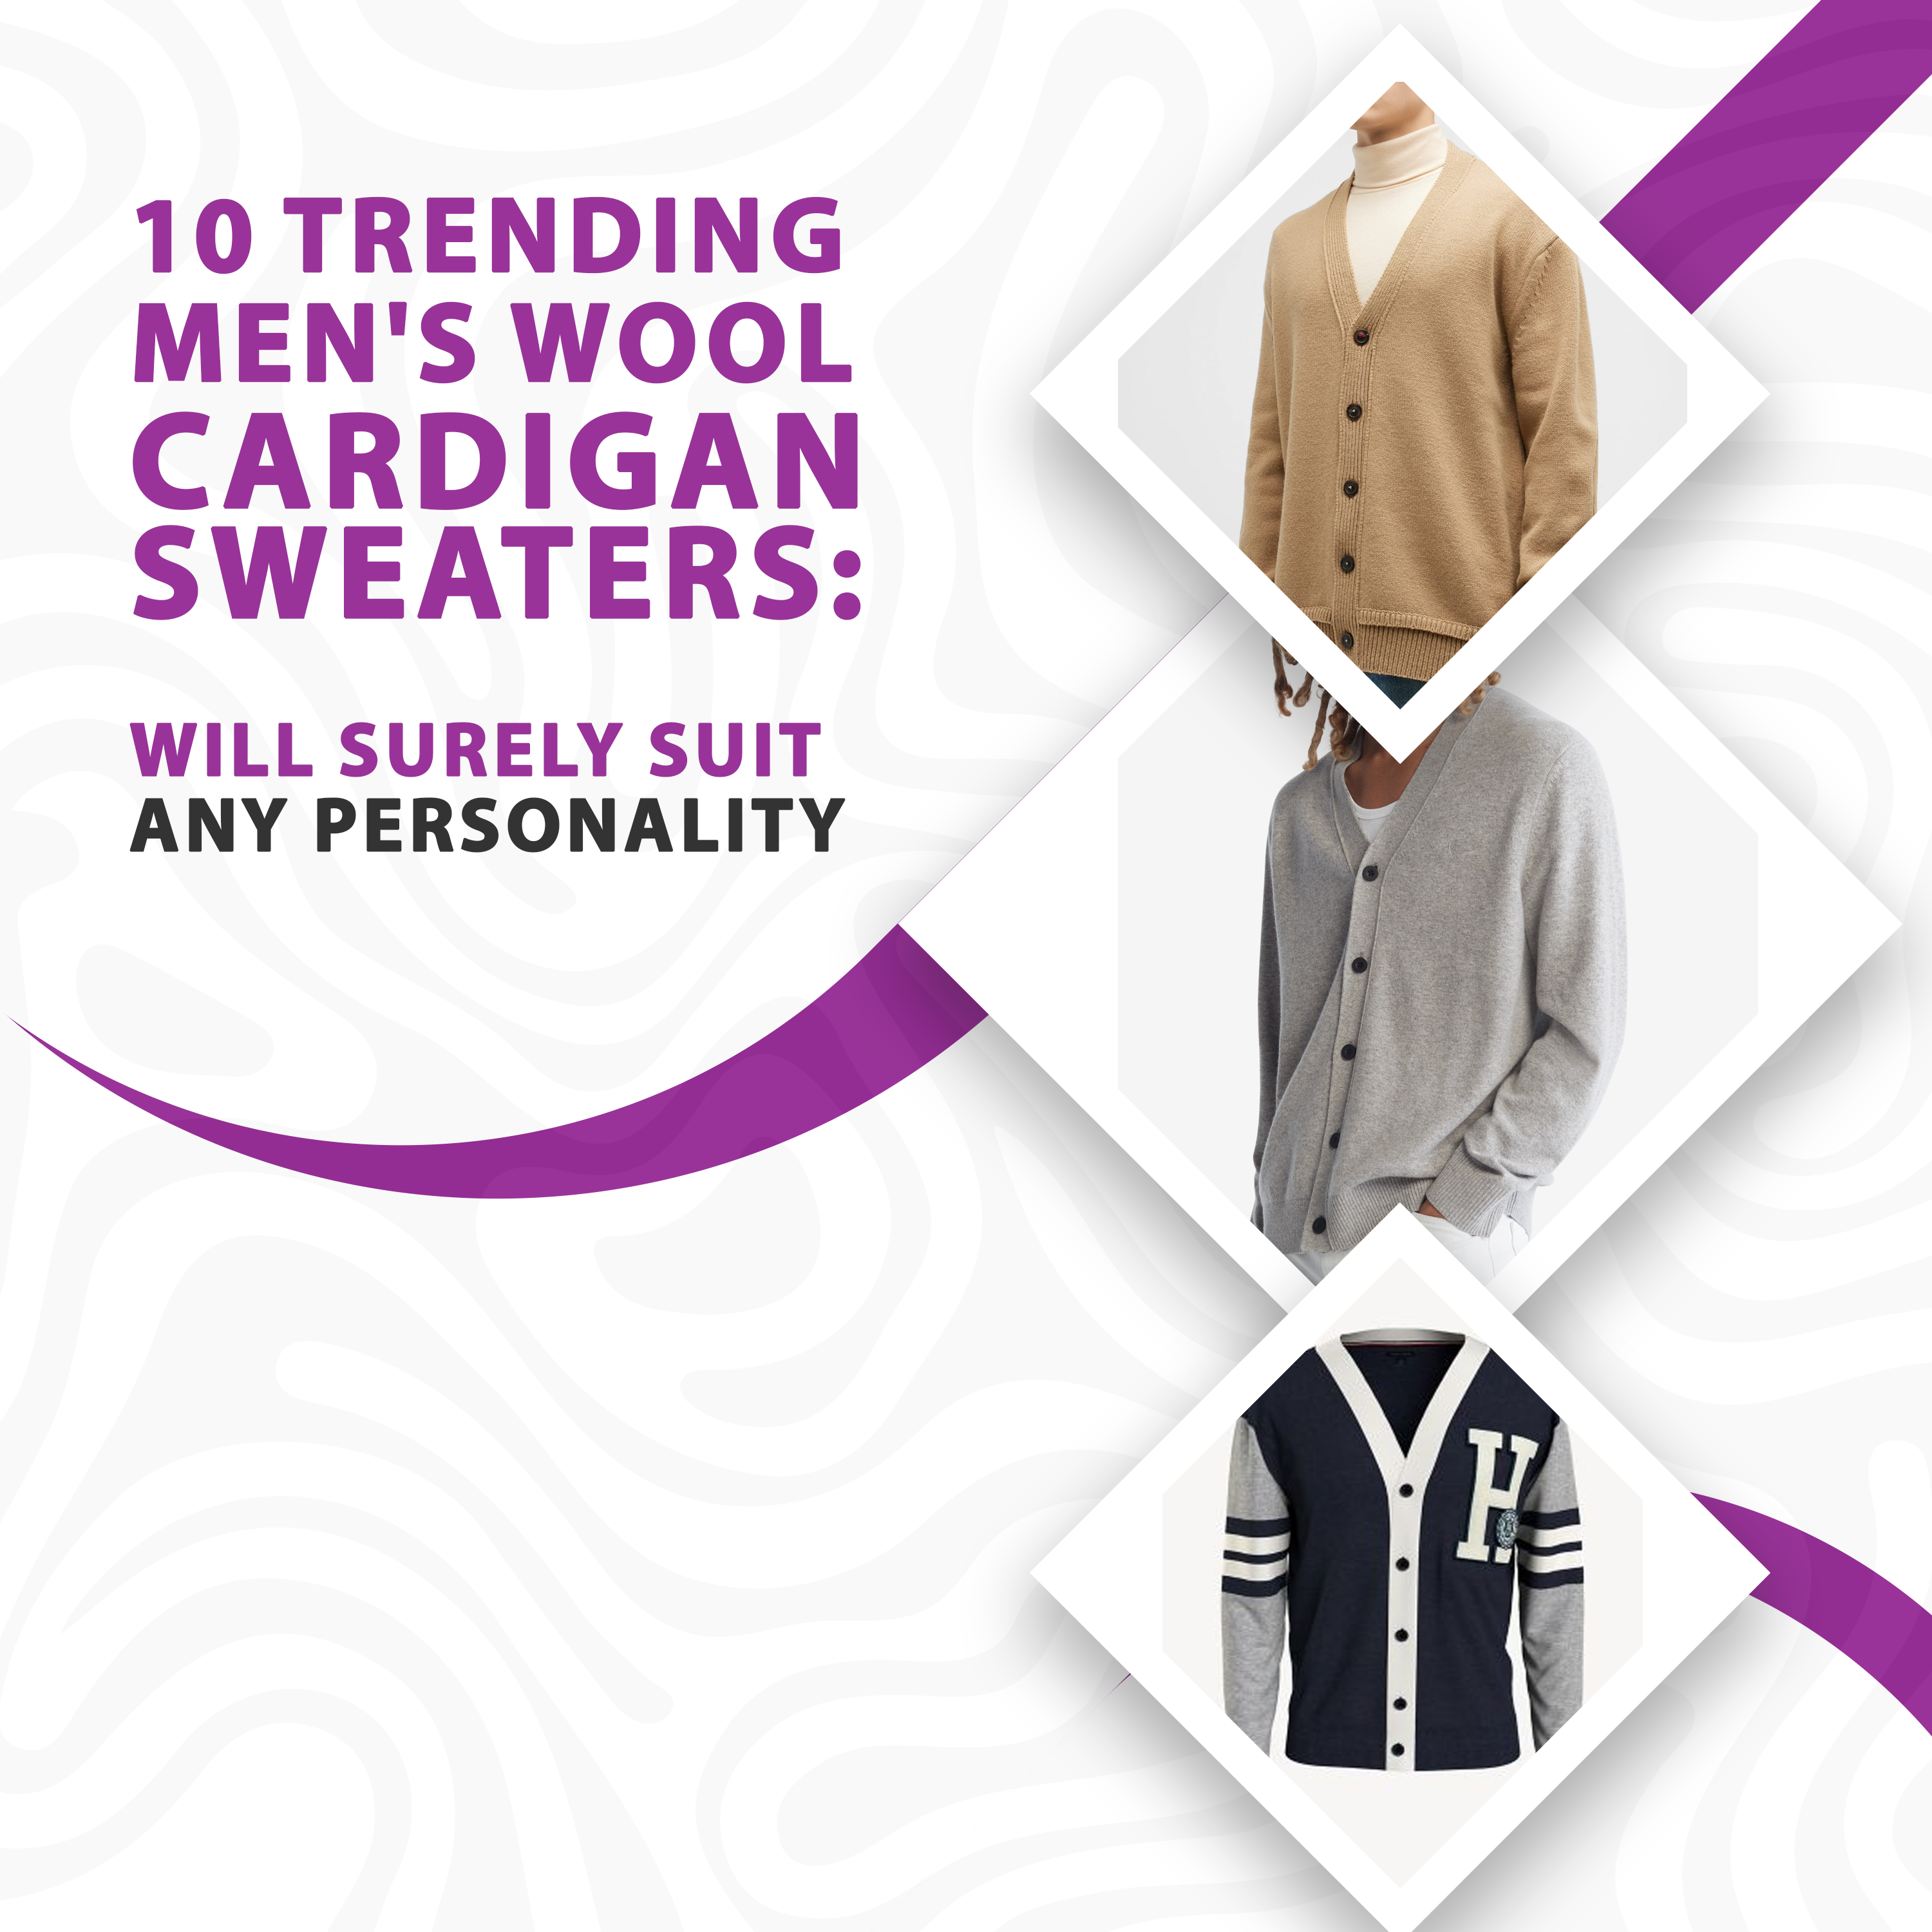 10 Trending Men’s Wool Cardigan Sweaters: Will Surely Suit Any Personality